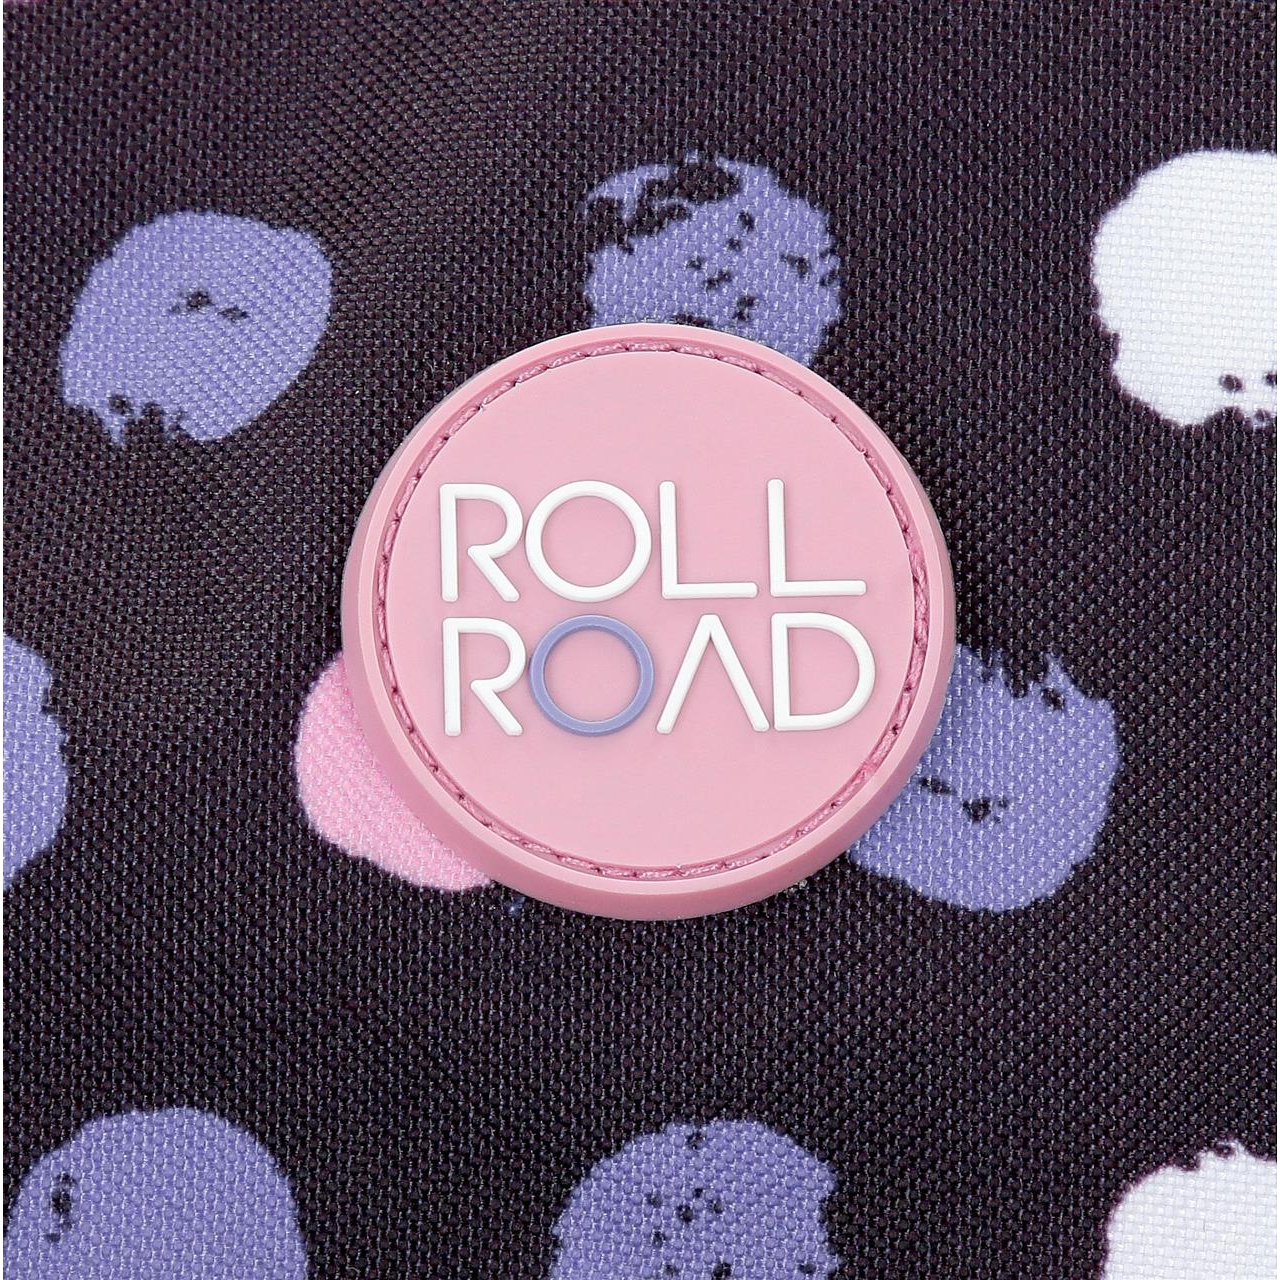 Estuche Roll Road The time is now